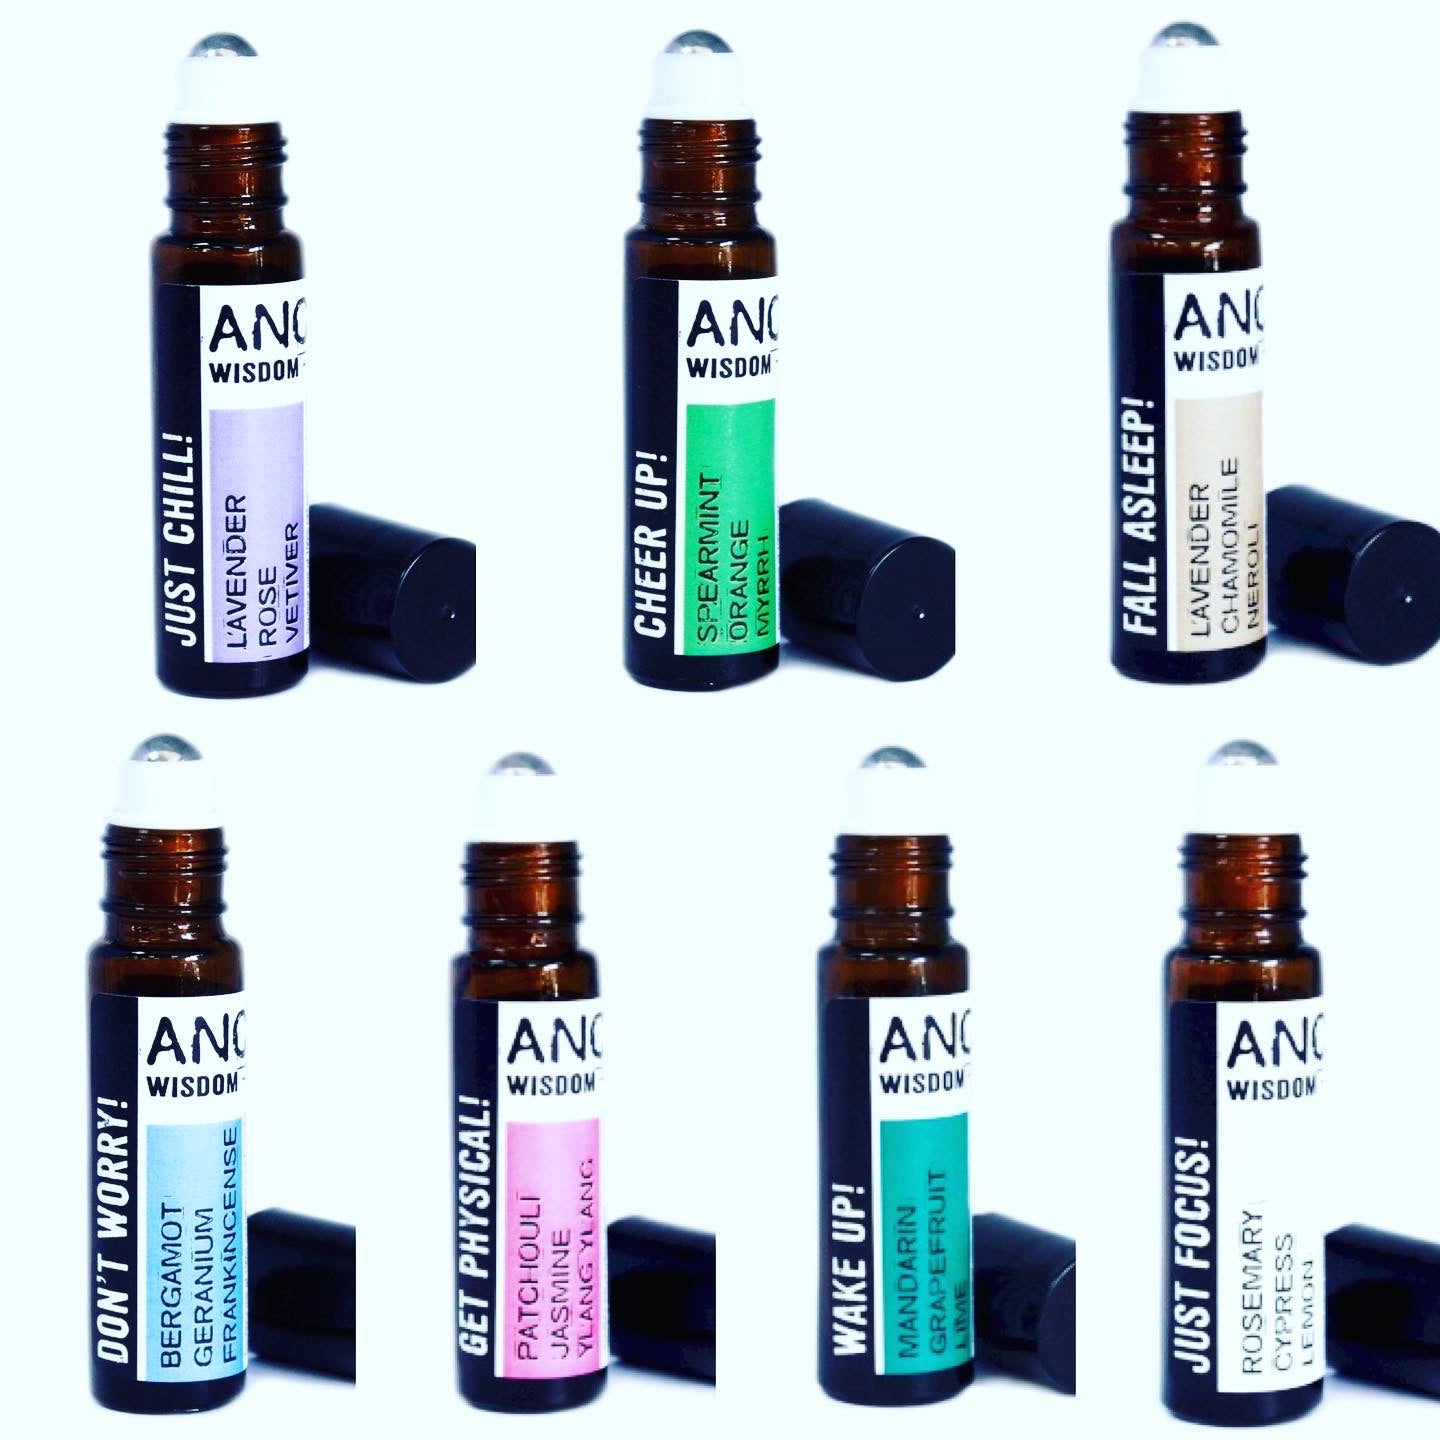 Aromatherapy essential oil pulse point fragrance